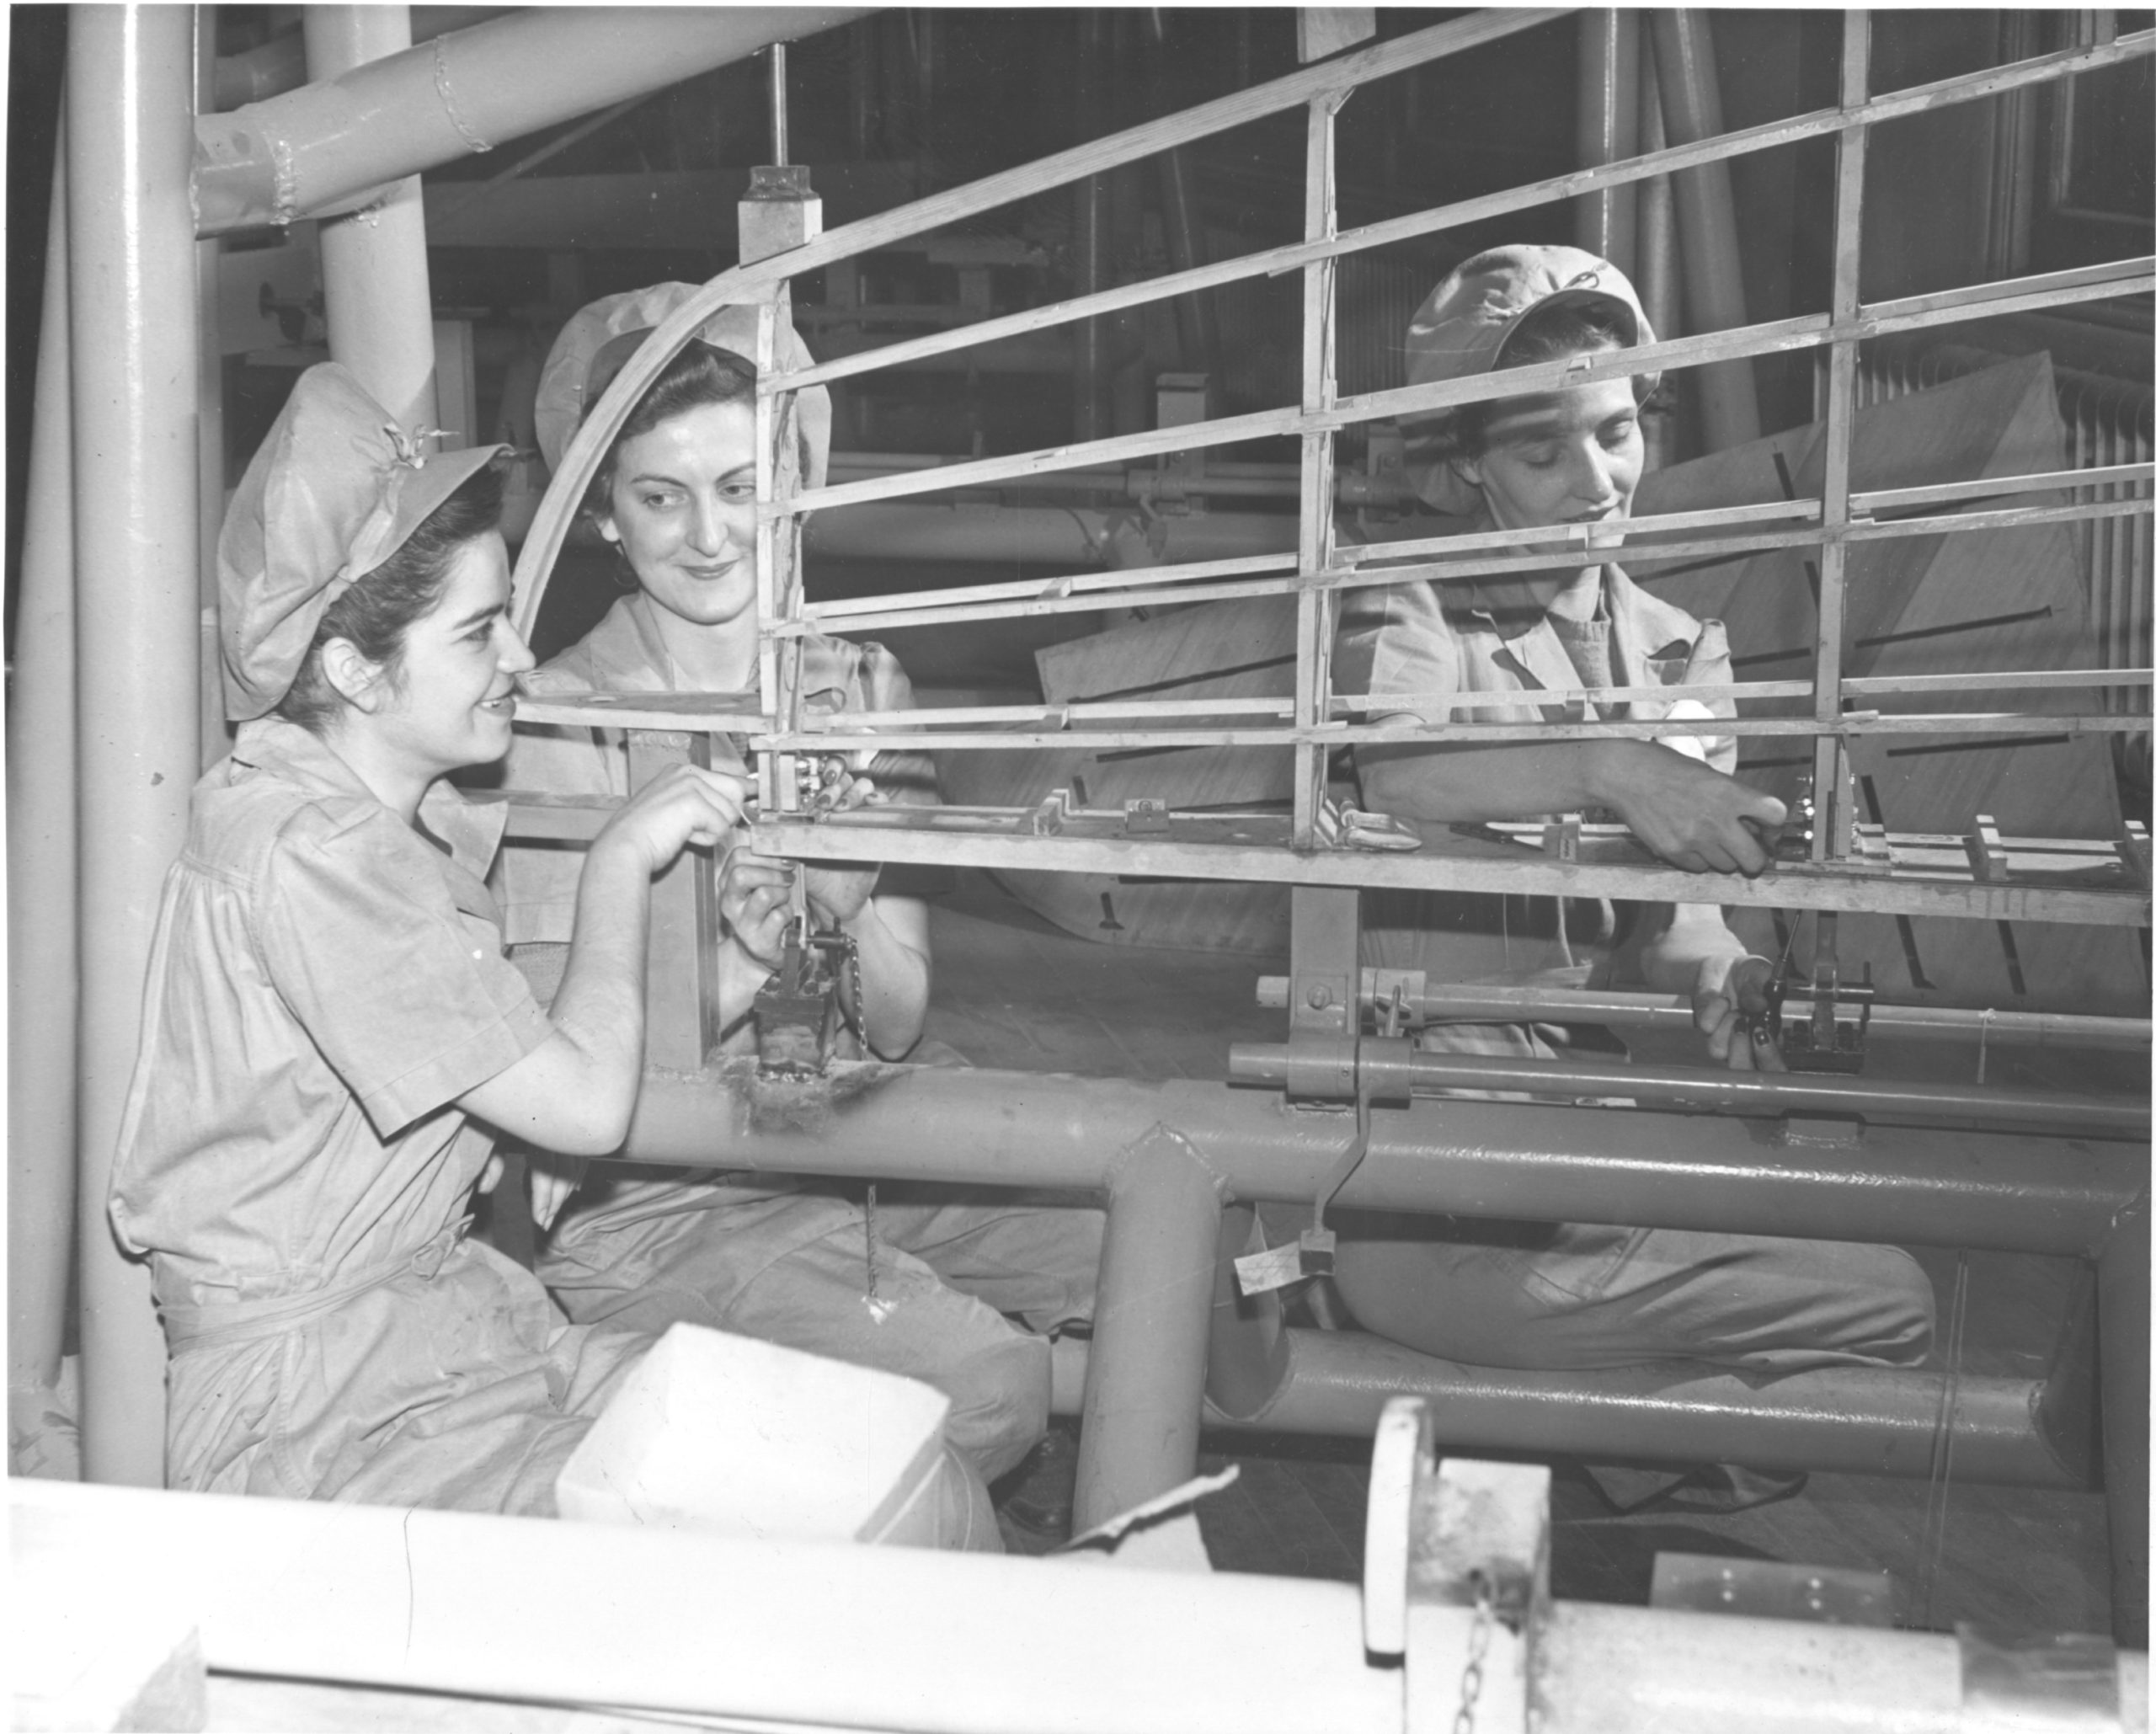 L to R: Margaret Nagy, Grace Slomar, Irene Hays work to assemble parts of a wing at Heinz, 1942-1943.